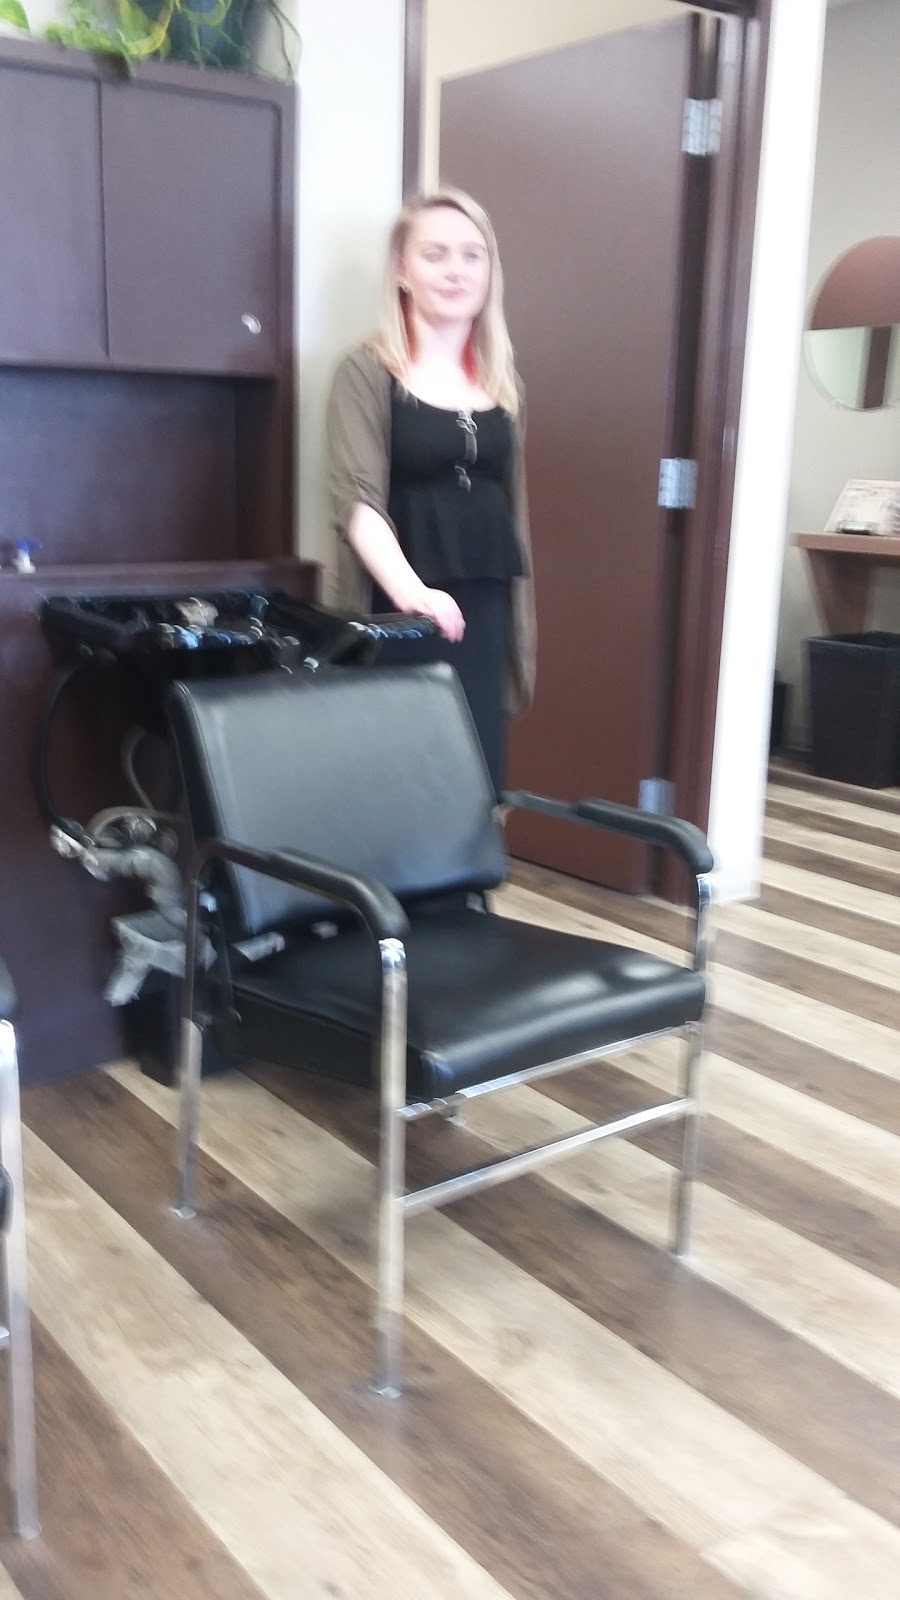 Terrys Hair Salon And Spa | hair care | 3304 Portage Ave, Winnipeg, MB R3K 0Z1, Canada | 2048886210 OR +1 204-888-6210